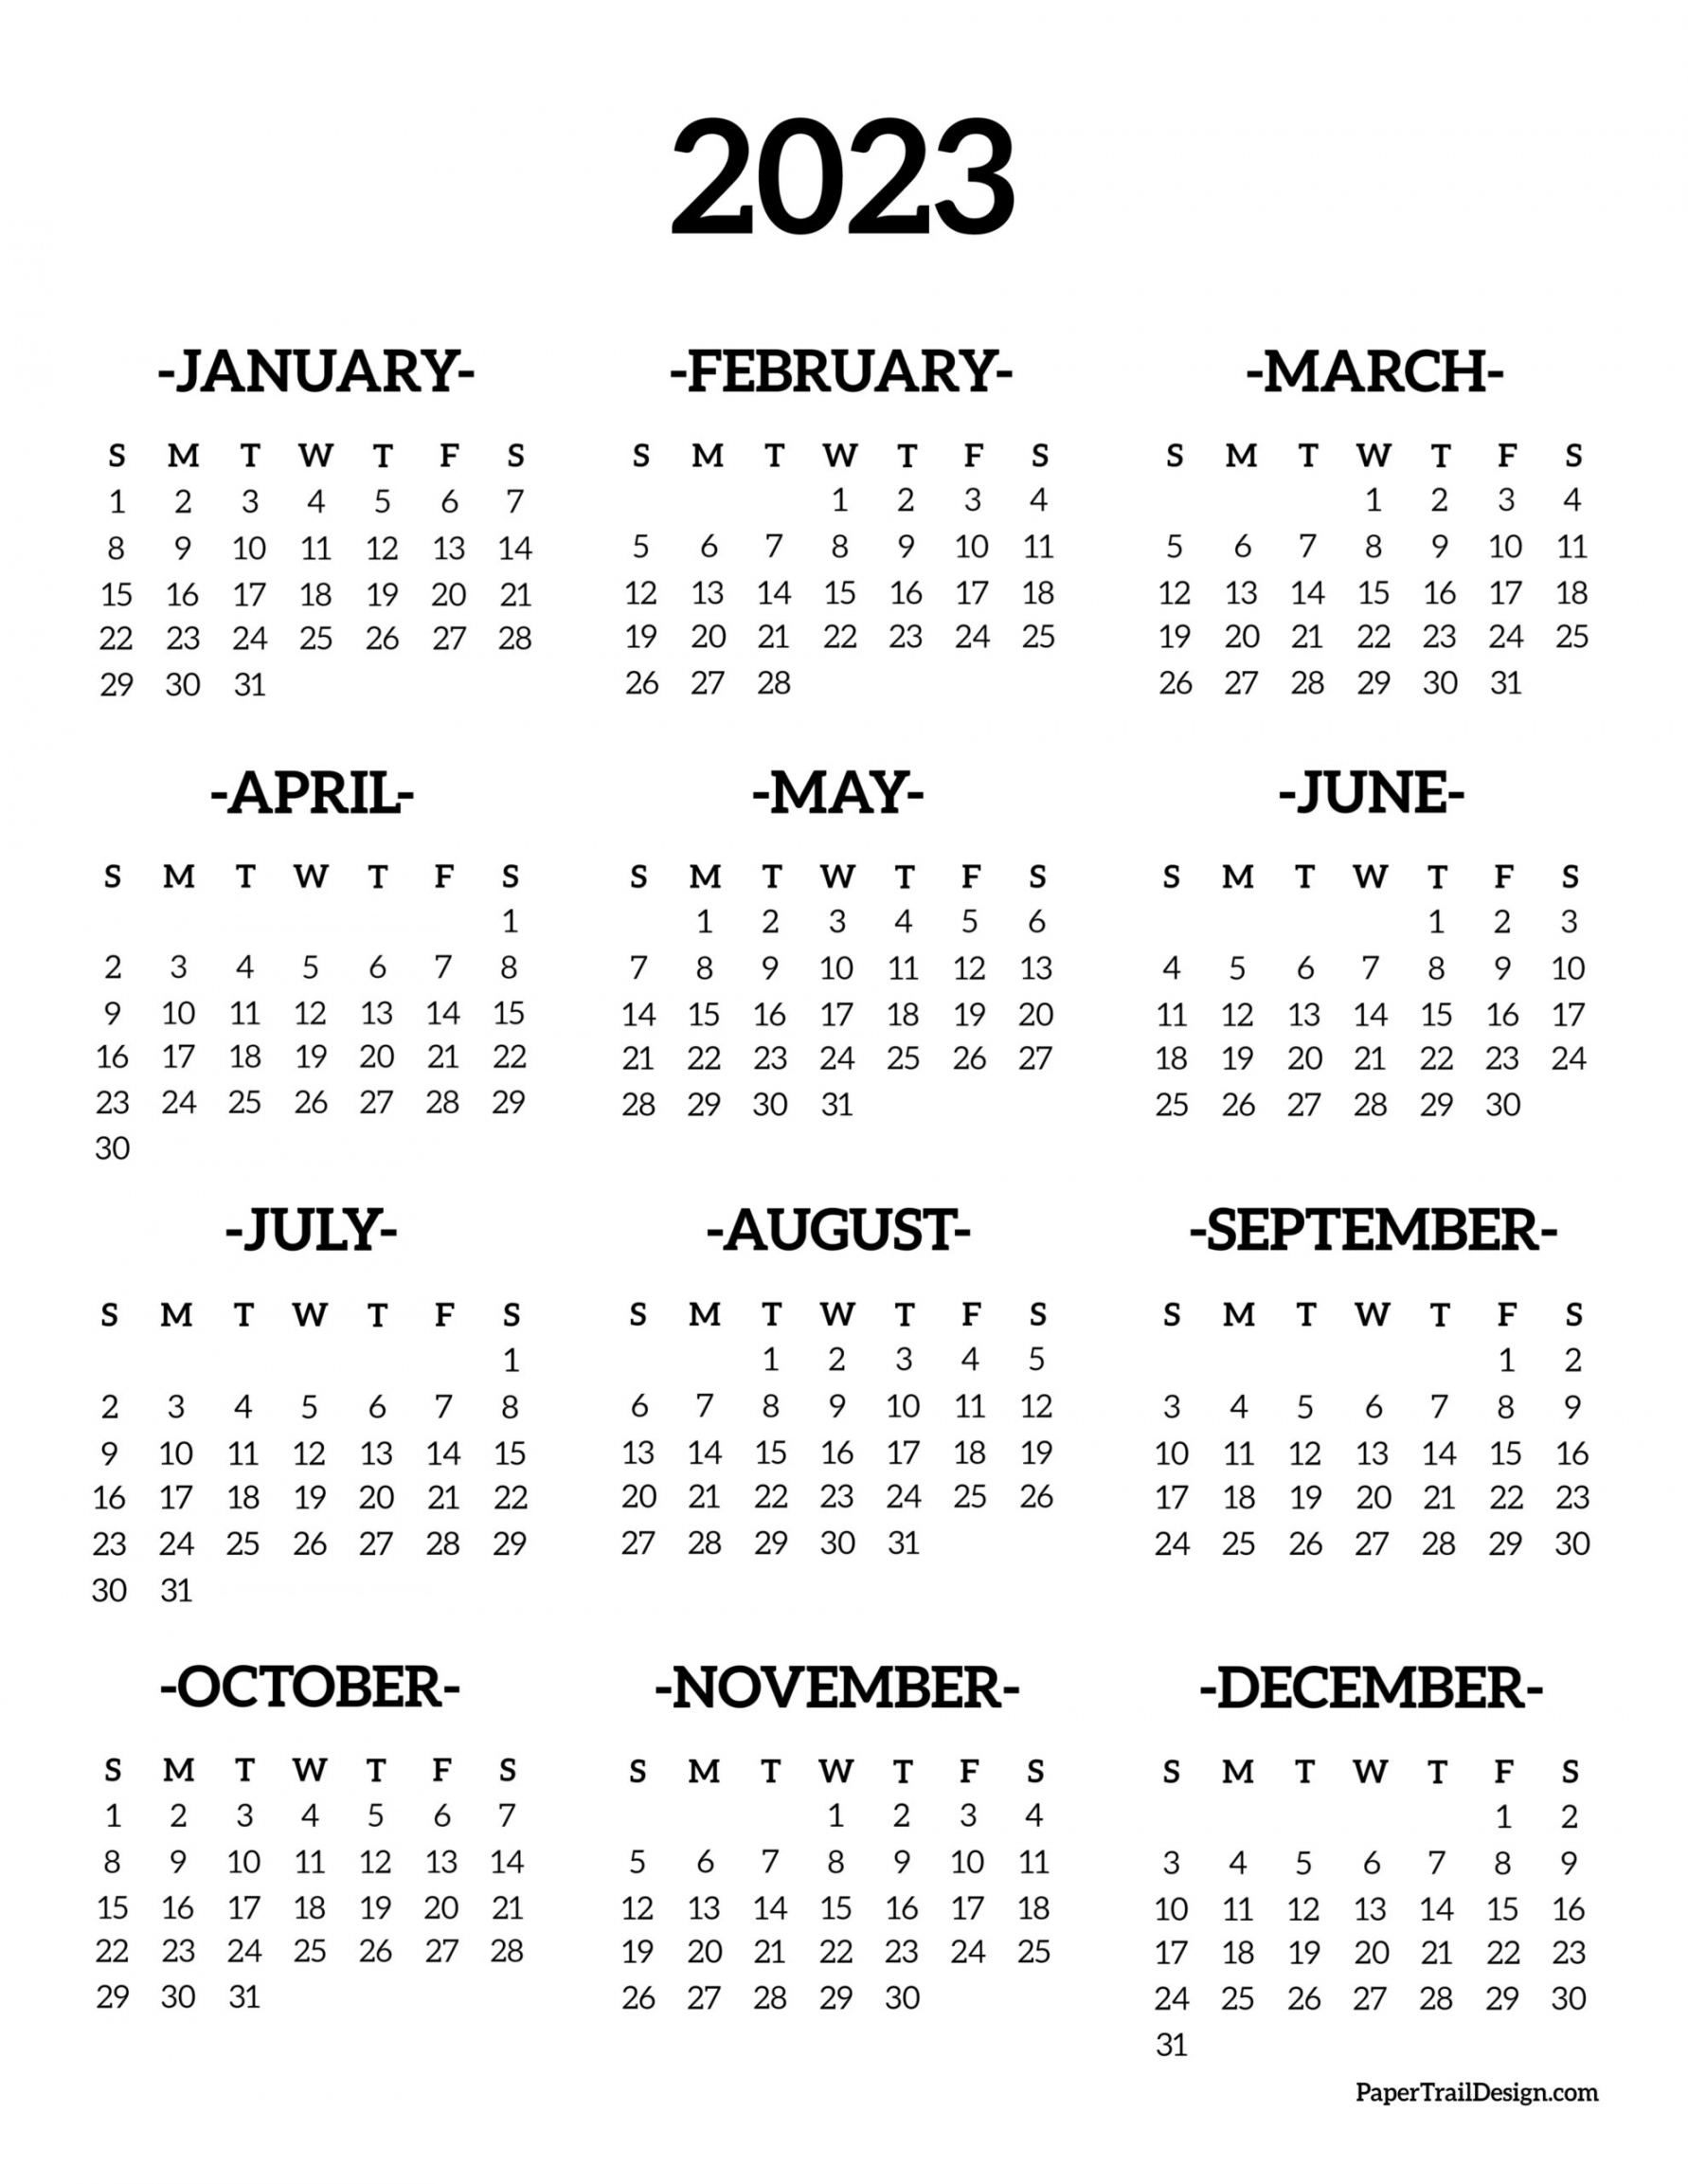 Calendar 2023 Printable Free - Printable - Calendar  Printable One Page - Paper Trail Design